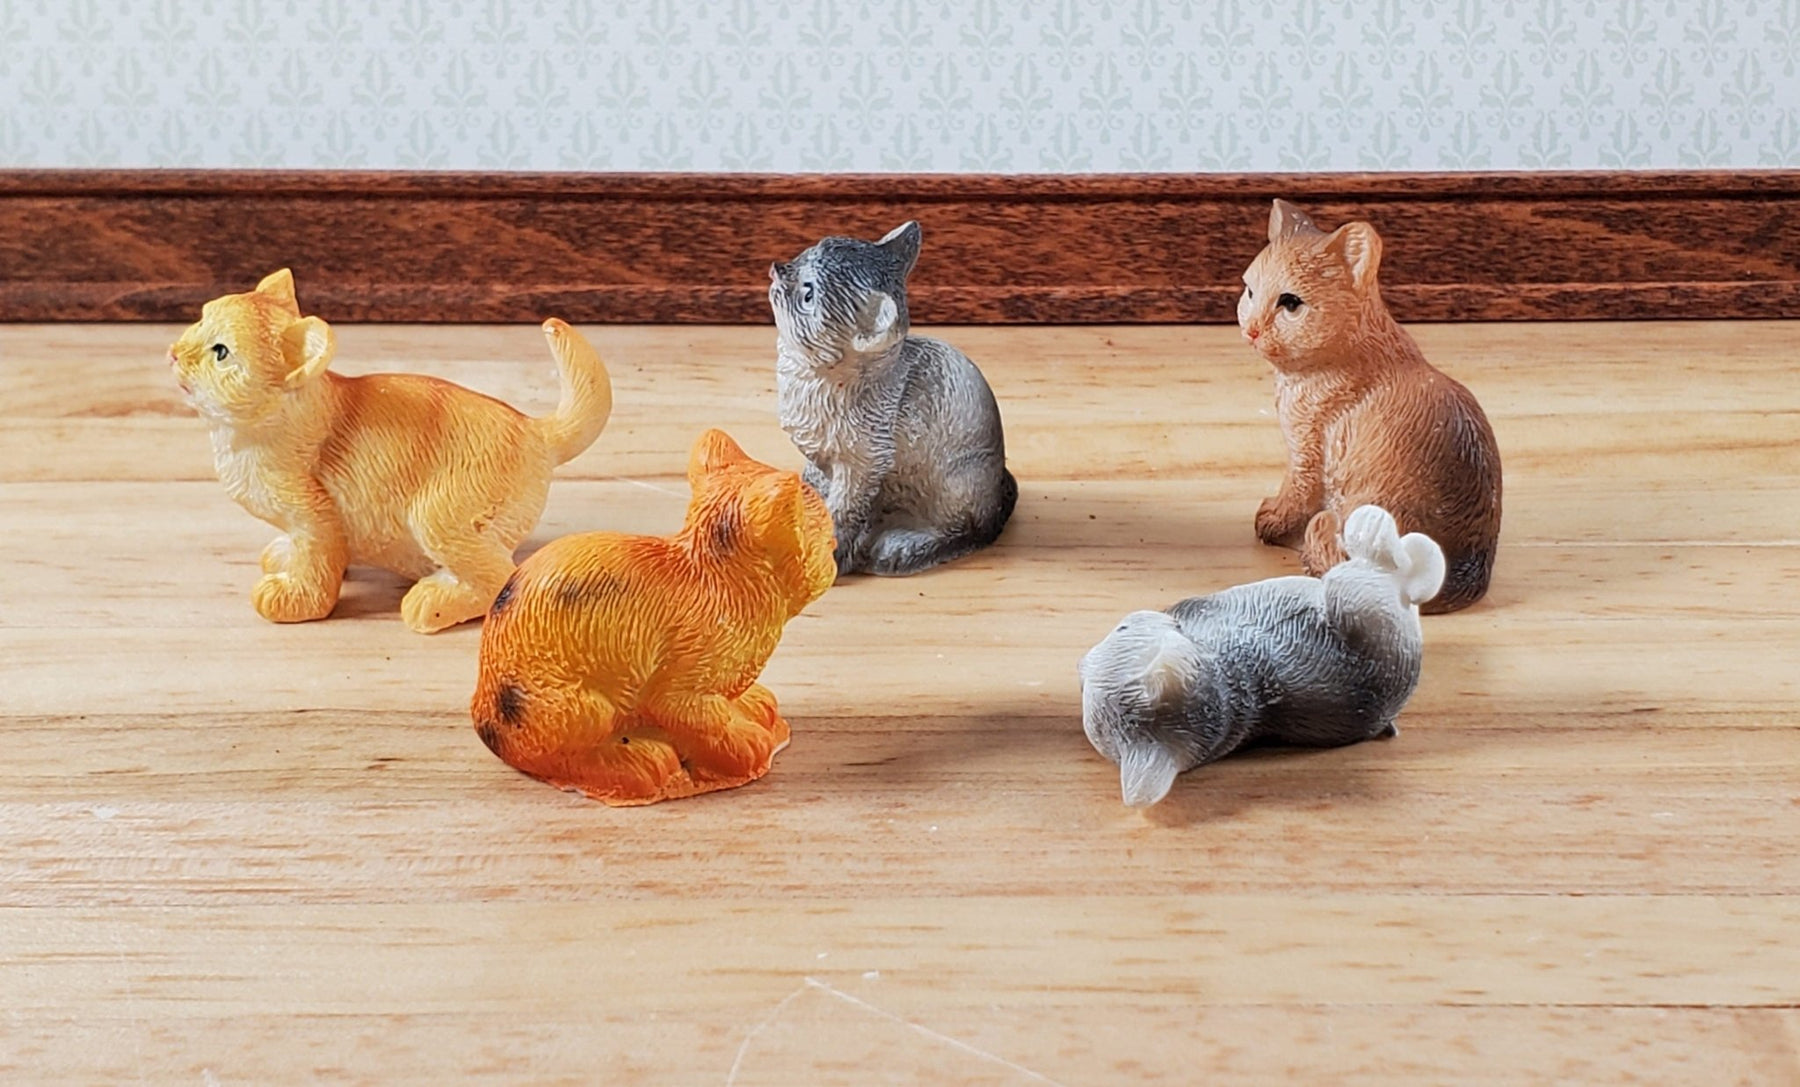 5 Dollhouse Cats Ginger Orange Tabby Tabbies Kittens 1:12 Scale Animals  Cats - Miniature Crush